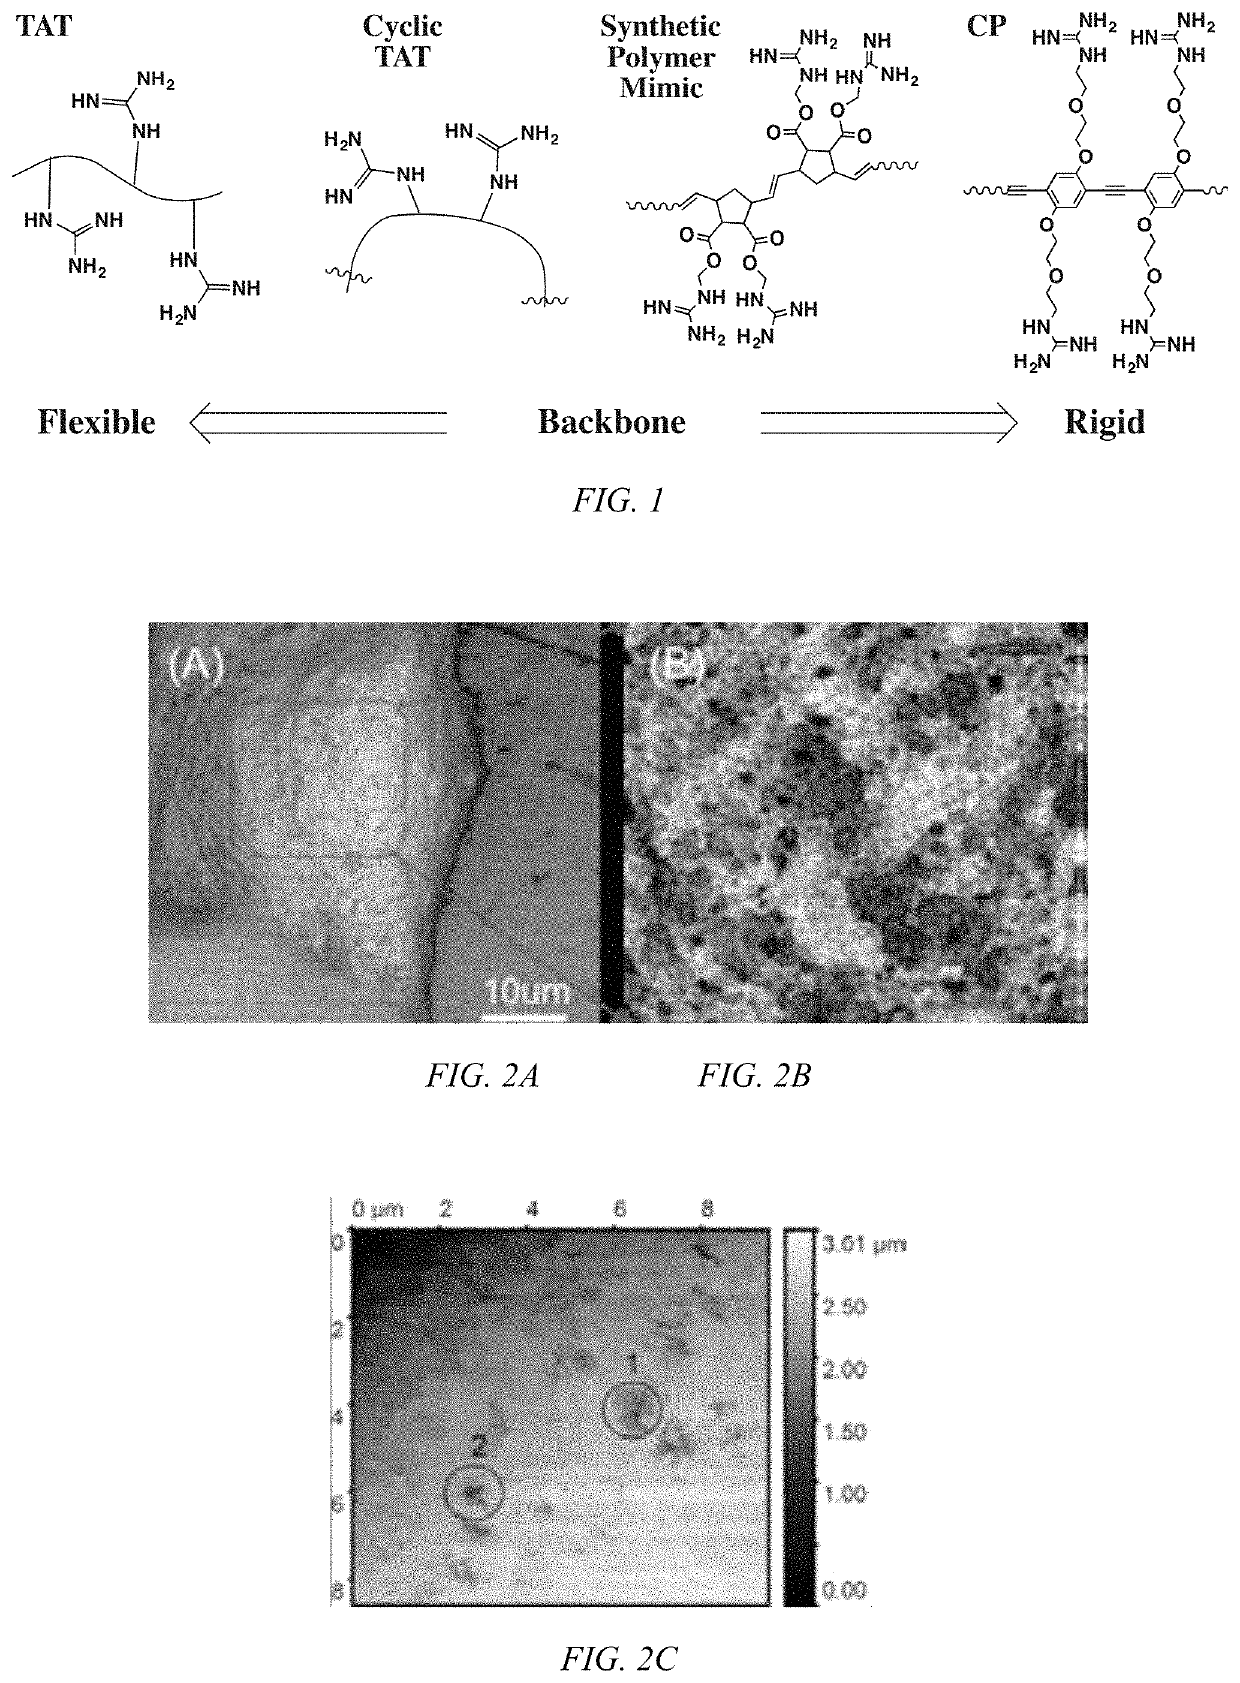 Modulated guanidine-containing polymers or nanoparticles